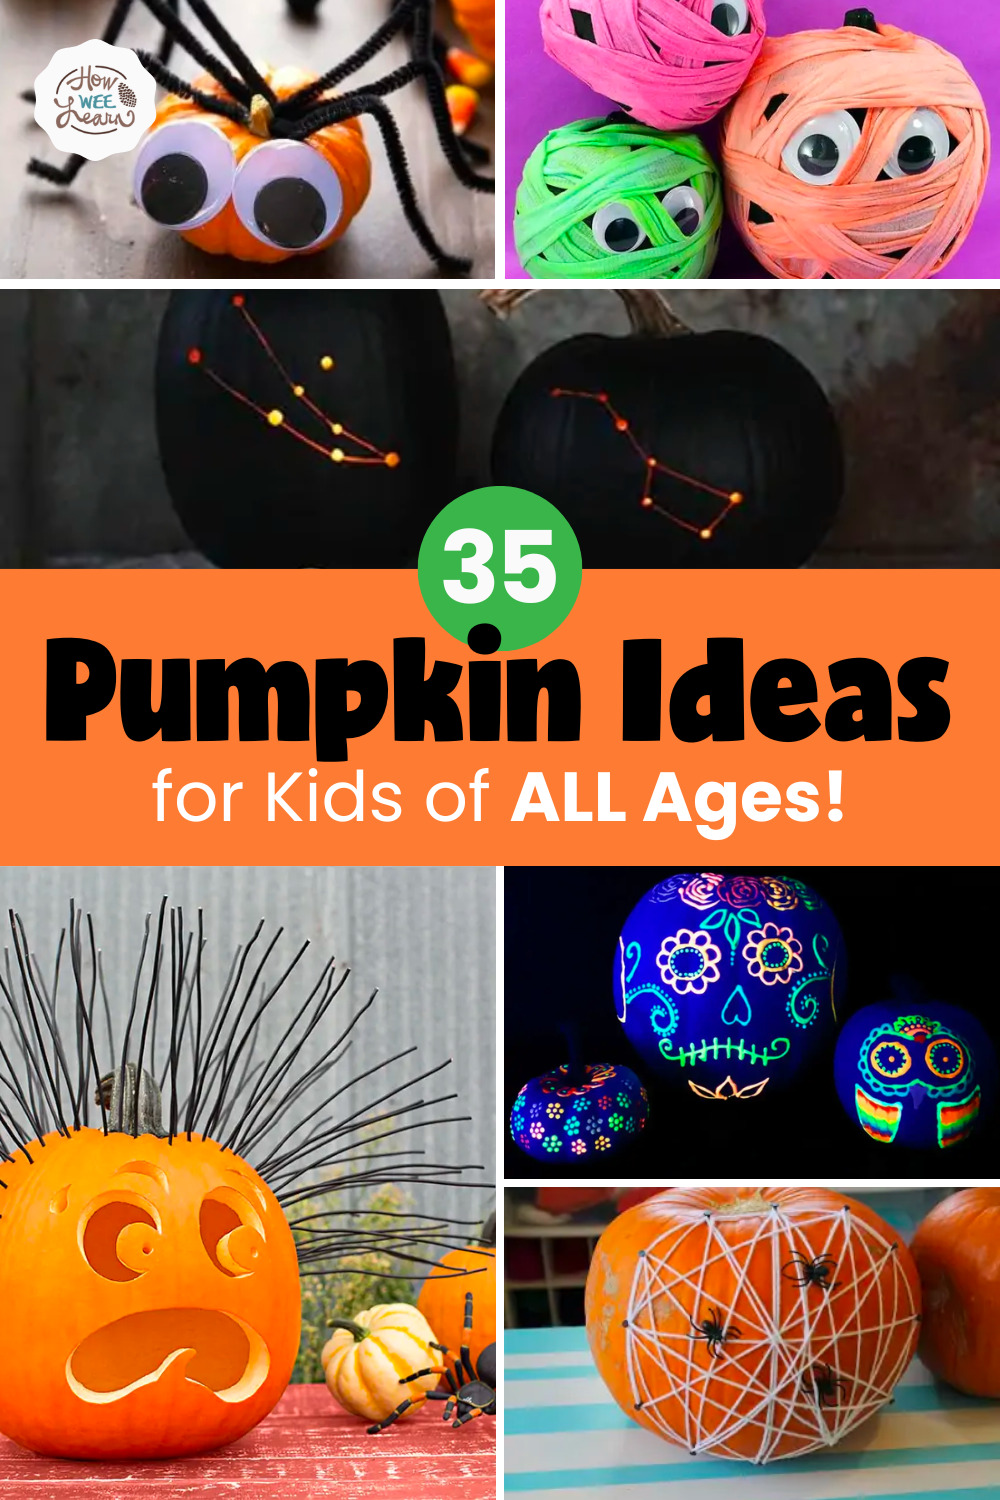 These are perfect NO-CARVE pumpkin decorating ideas that let toddlers and preschoolers get in on the Halloween fun! Great pumpkin crafts for kids. #howweelearn #pumpkindecorating #toddlercrafts #halloweencrafts #jackolantern #pumpkinideas #toddleractivities